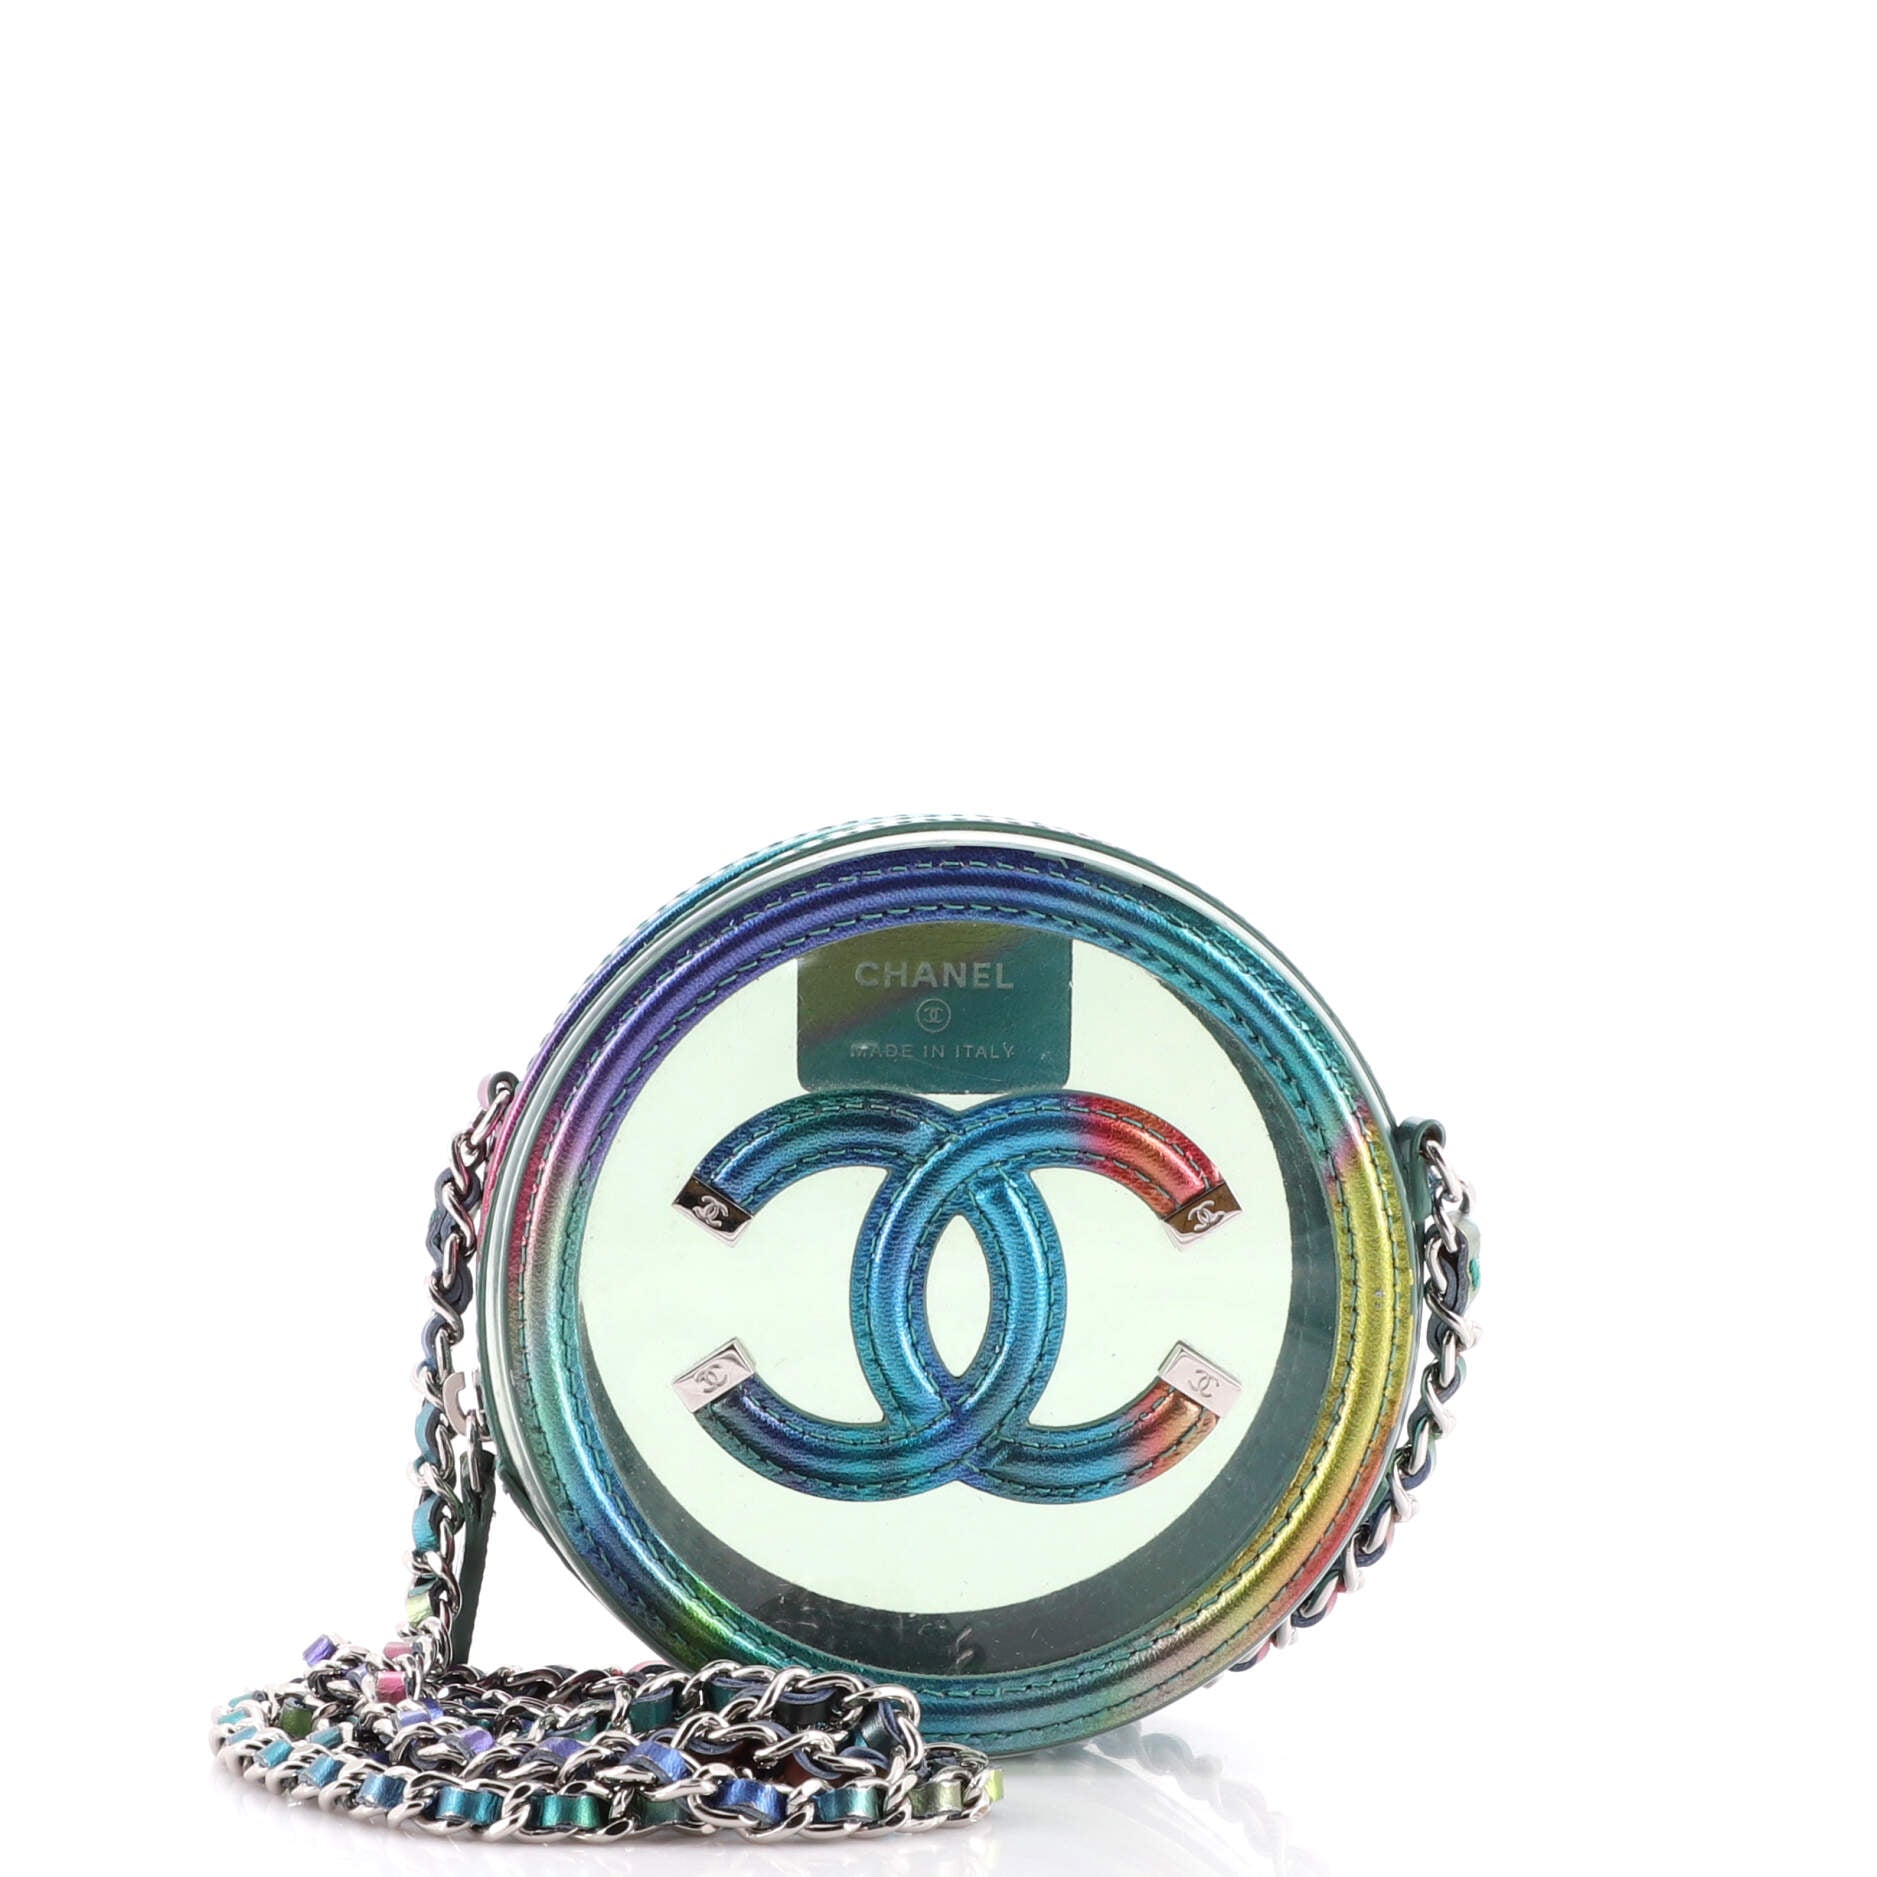 CHANEL, Bags, Chanel Filigree Vanity Case Pvc With Lambskin Small Clear  Multicolor